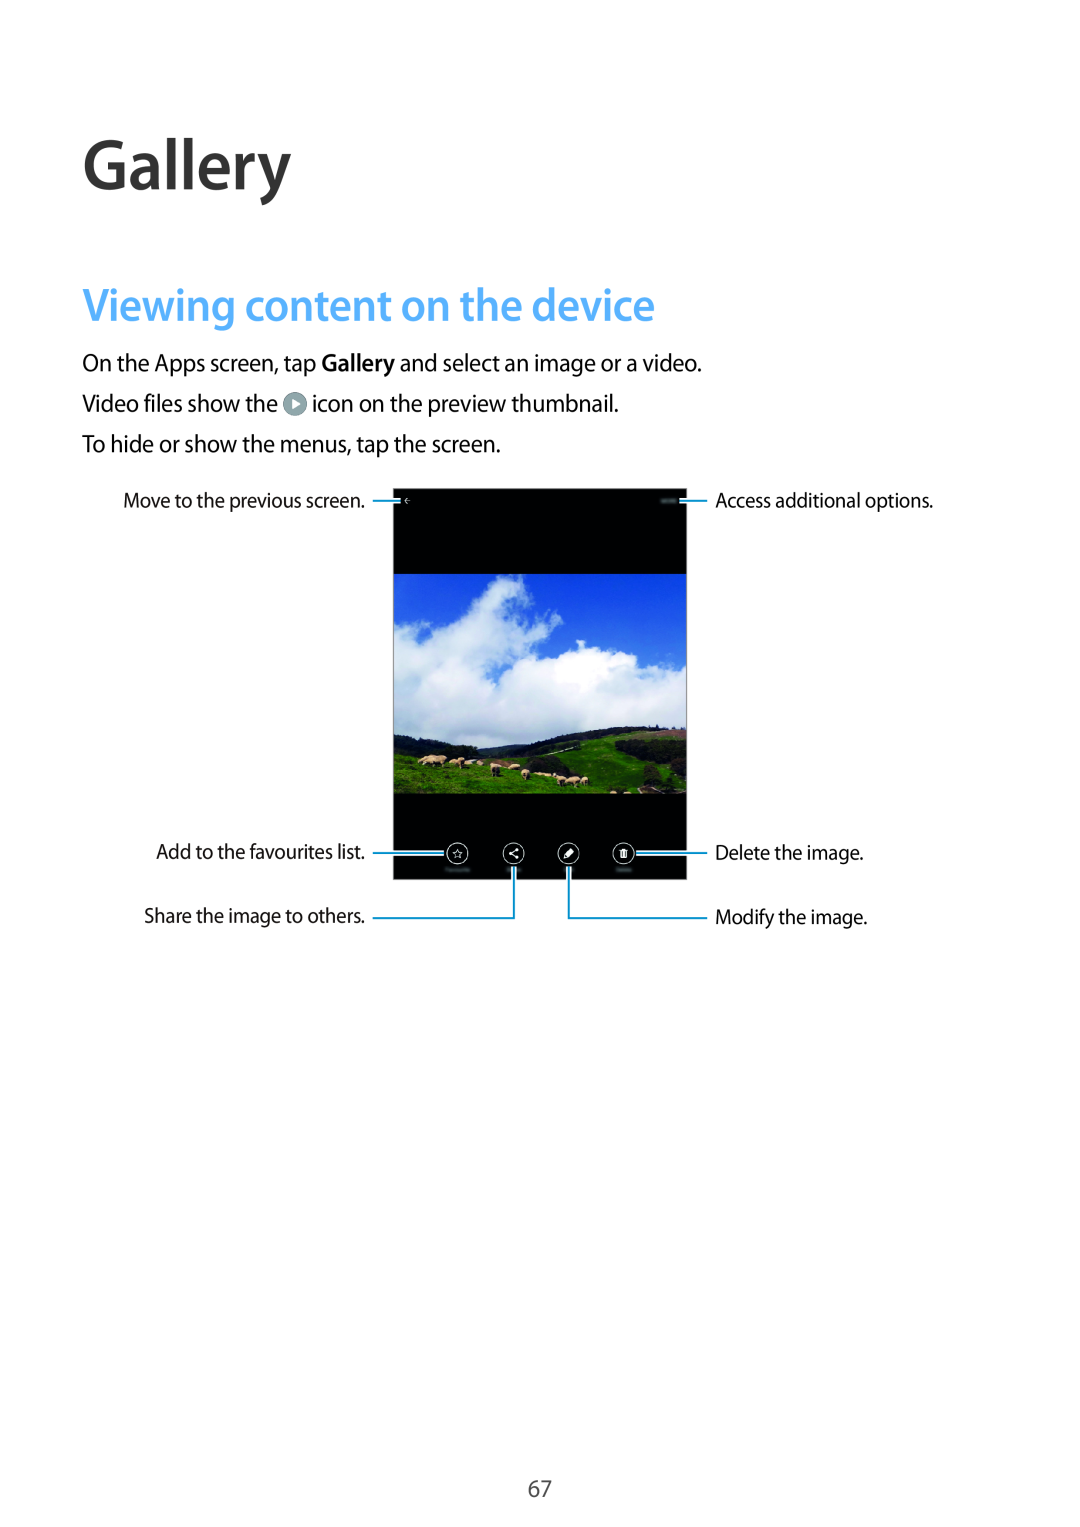 Samsung SM-P550NZAAXFA Gallery, Viewing content on the device, Move to the previous screen. Access additional options 